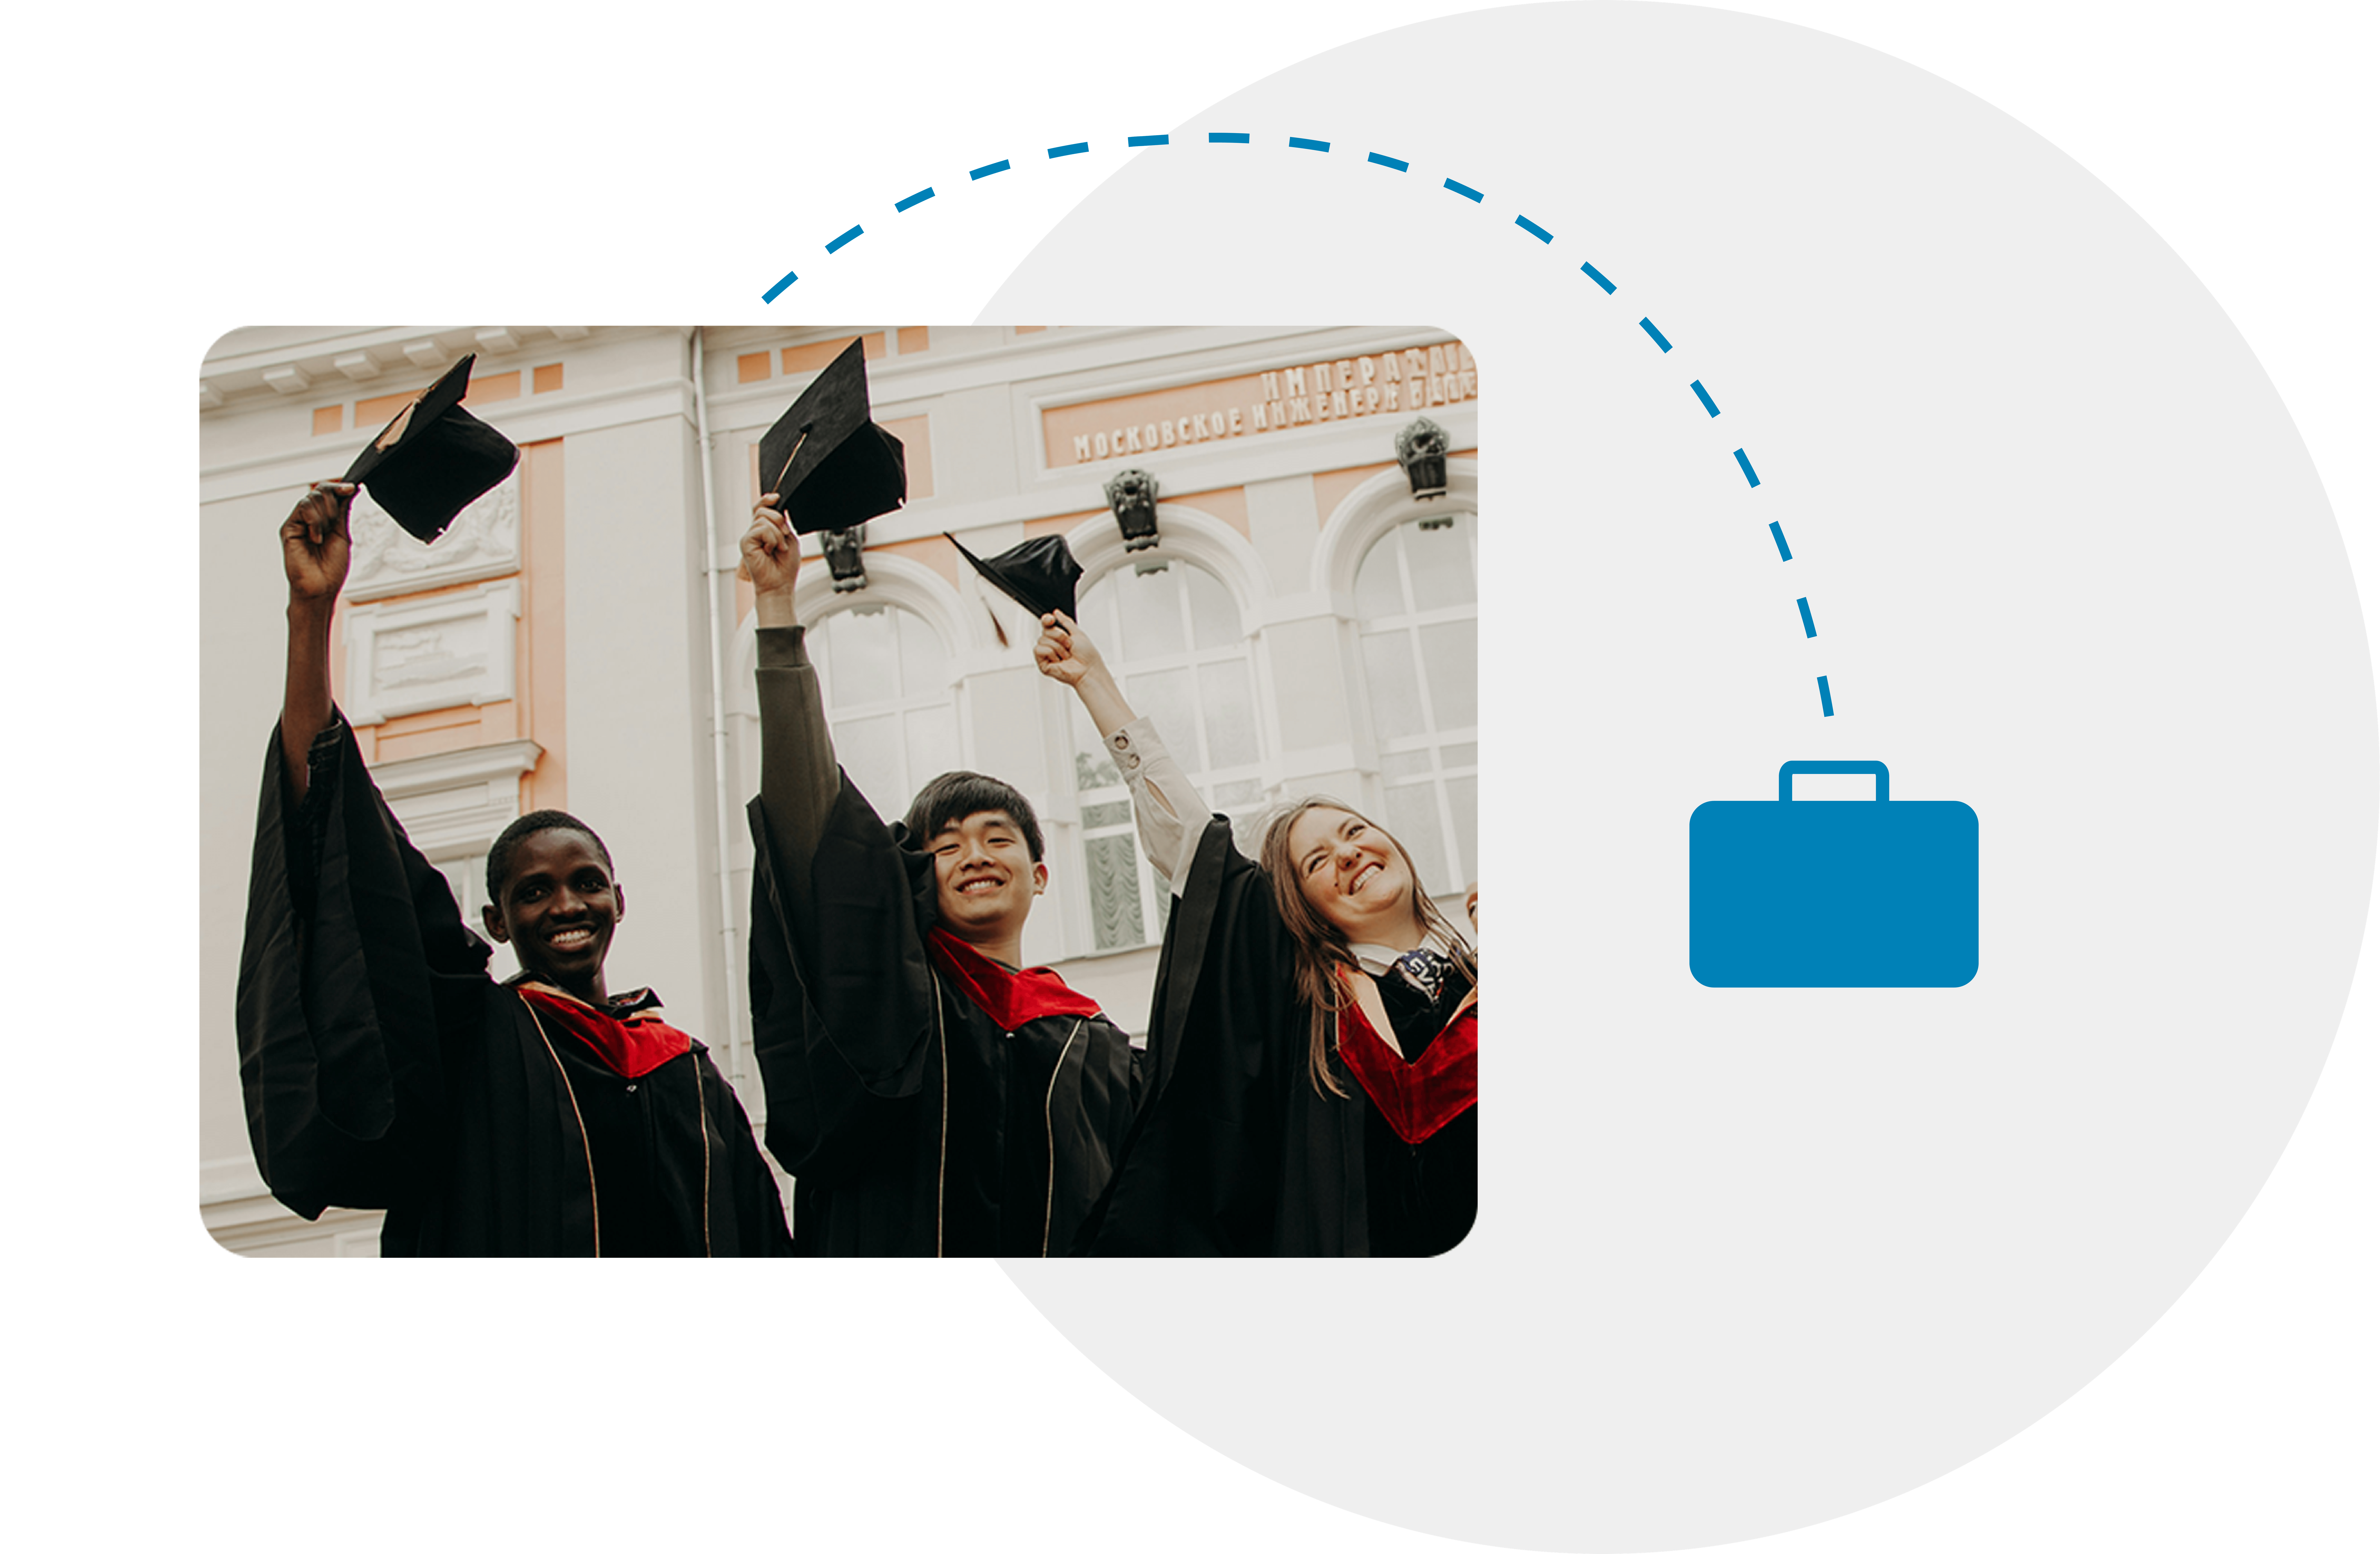 Graduates throwing caps in the air. A blue dotted line connects the image to a graphic of a briefcase.